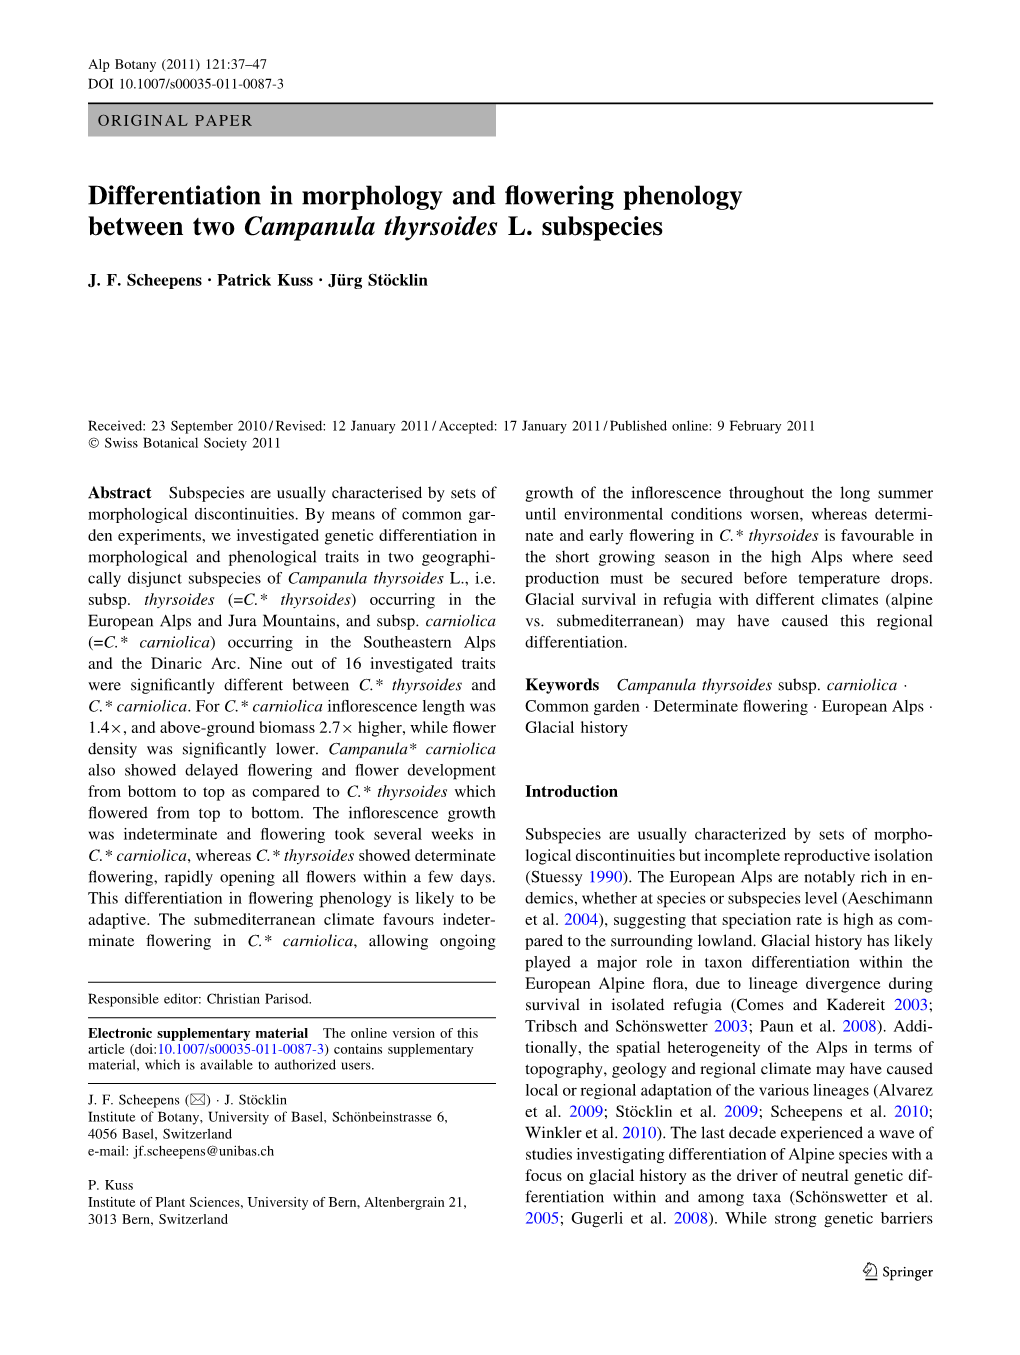 Differentiation in Morphology and Flowering Phenology